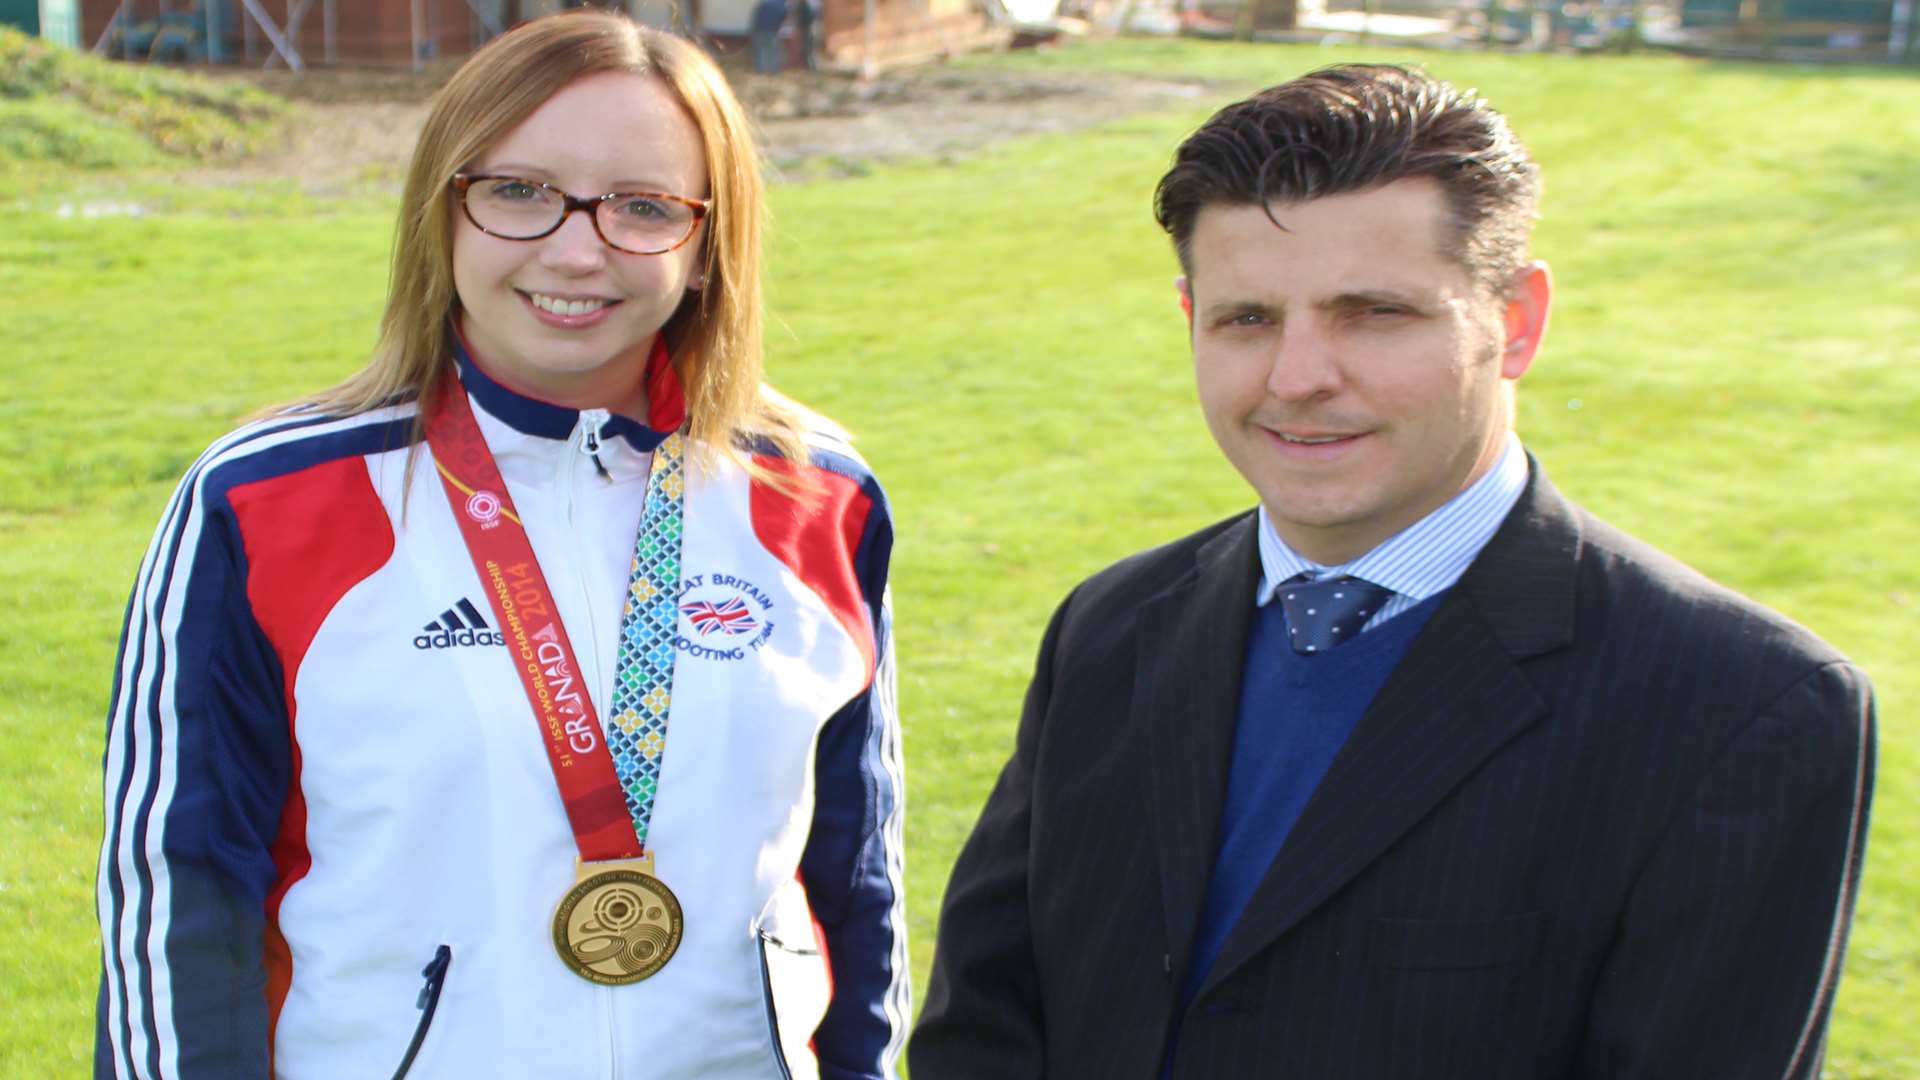 Gold medalist Sarah Gray with Ainsworth Civils and Engineering managing director Julius Ainsworth